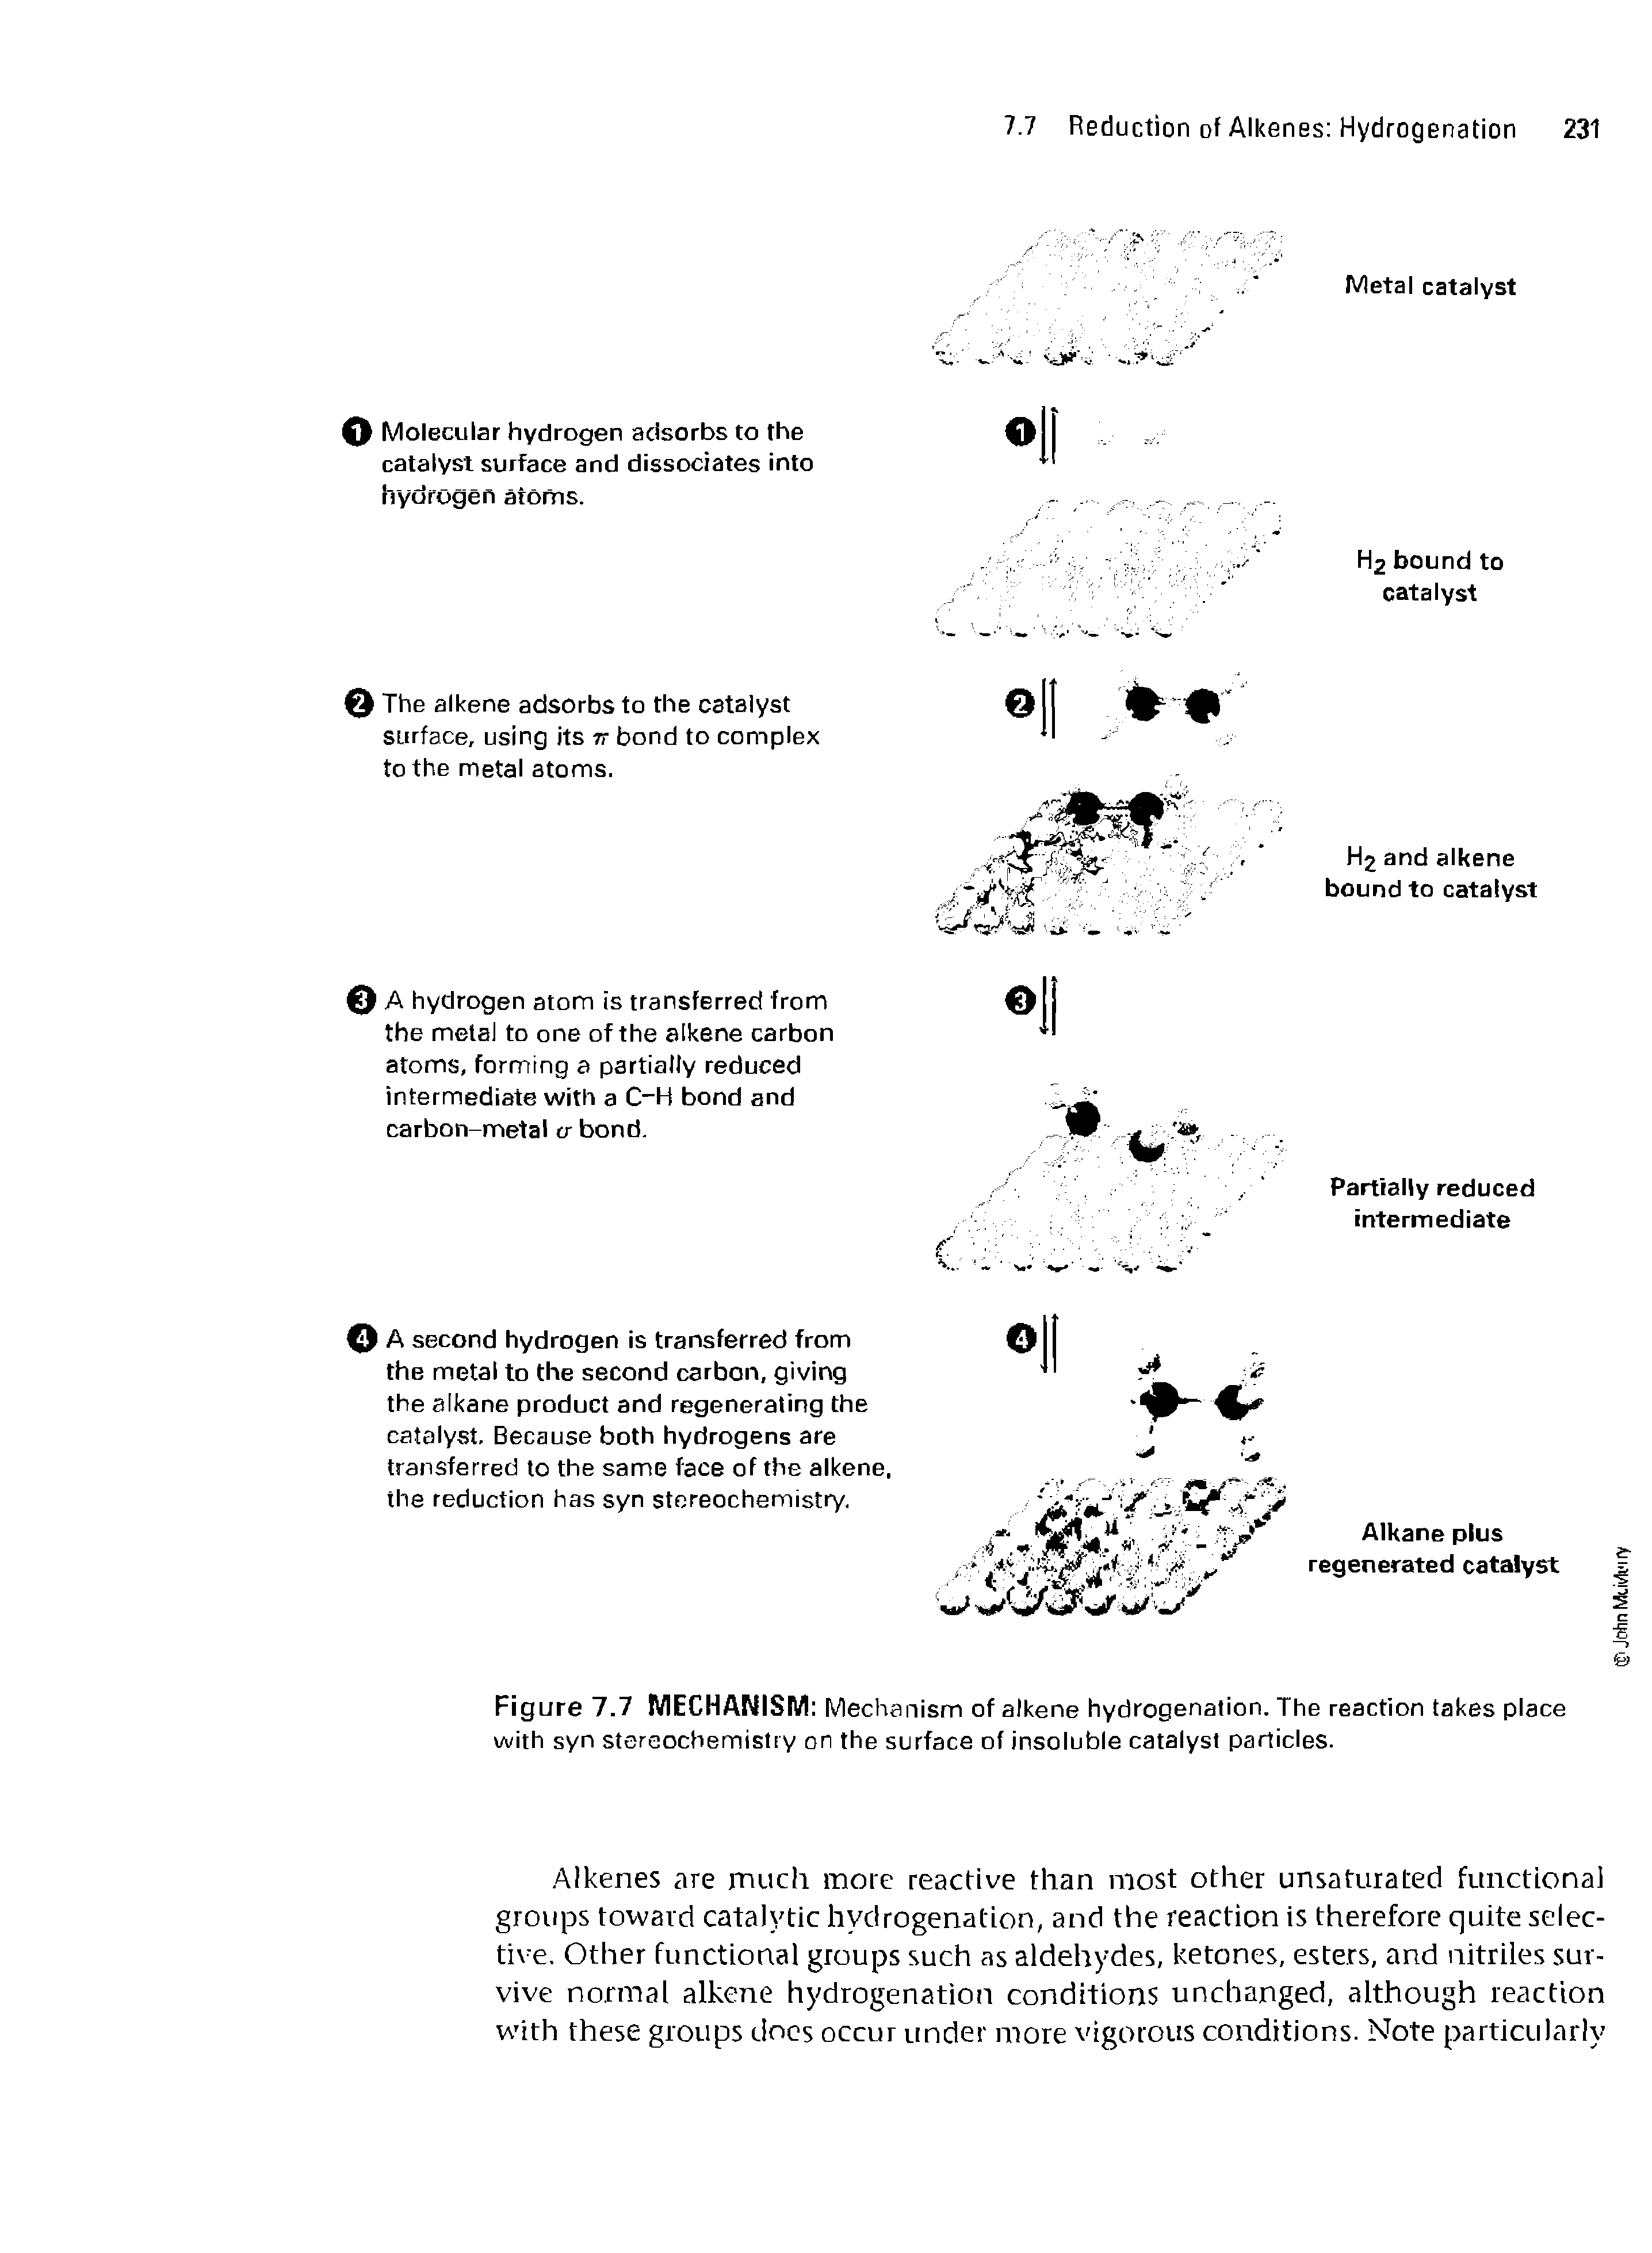 Figure 7.7 MECHANISM Mechanism of alkene hydrogenation. The reaction takes place with syn stereochemistry on the surface of insoluble catalyst particles.